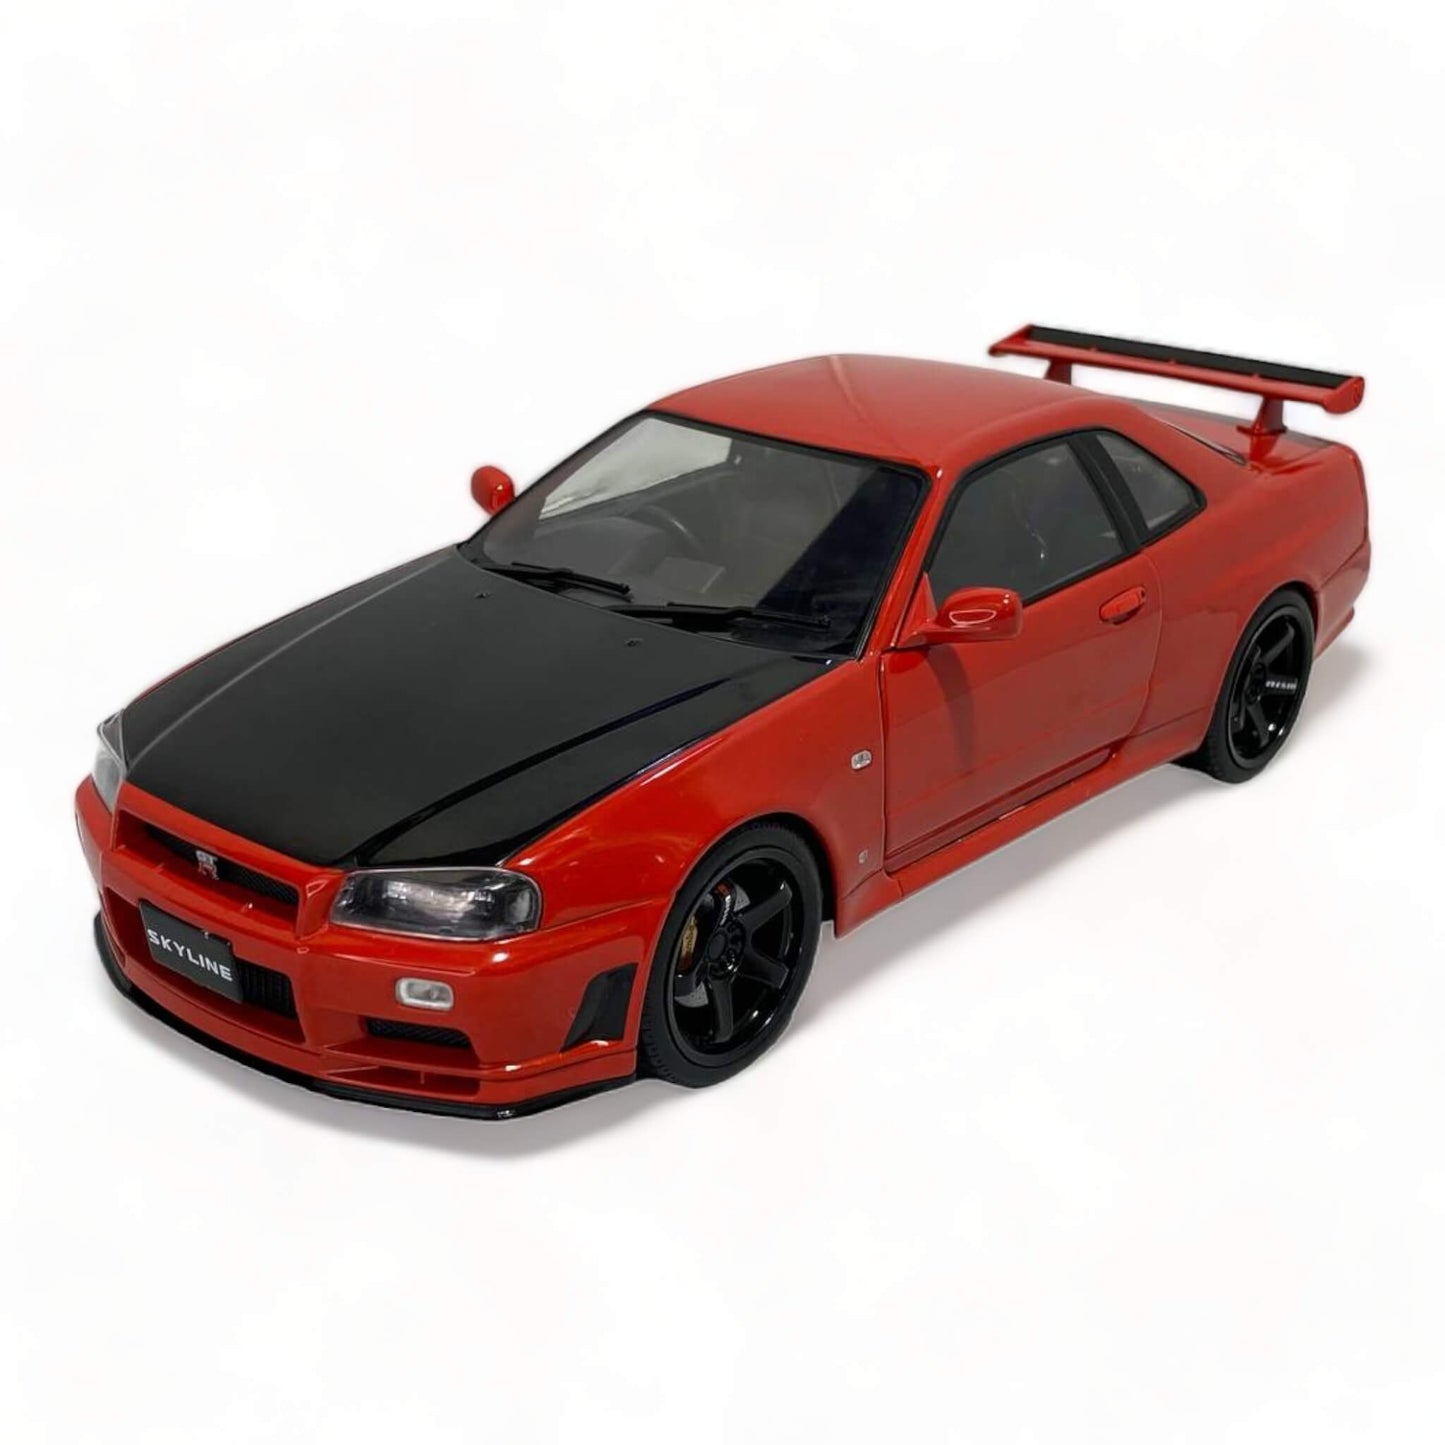 Diecast Nissan GT-R R34 Skyline Active Red 1/18 1999 by Solido Model Car